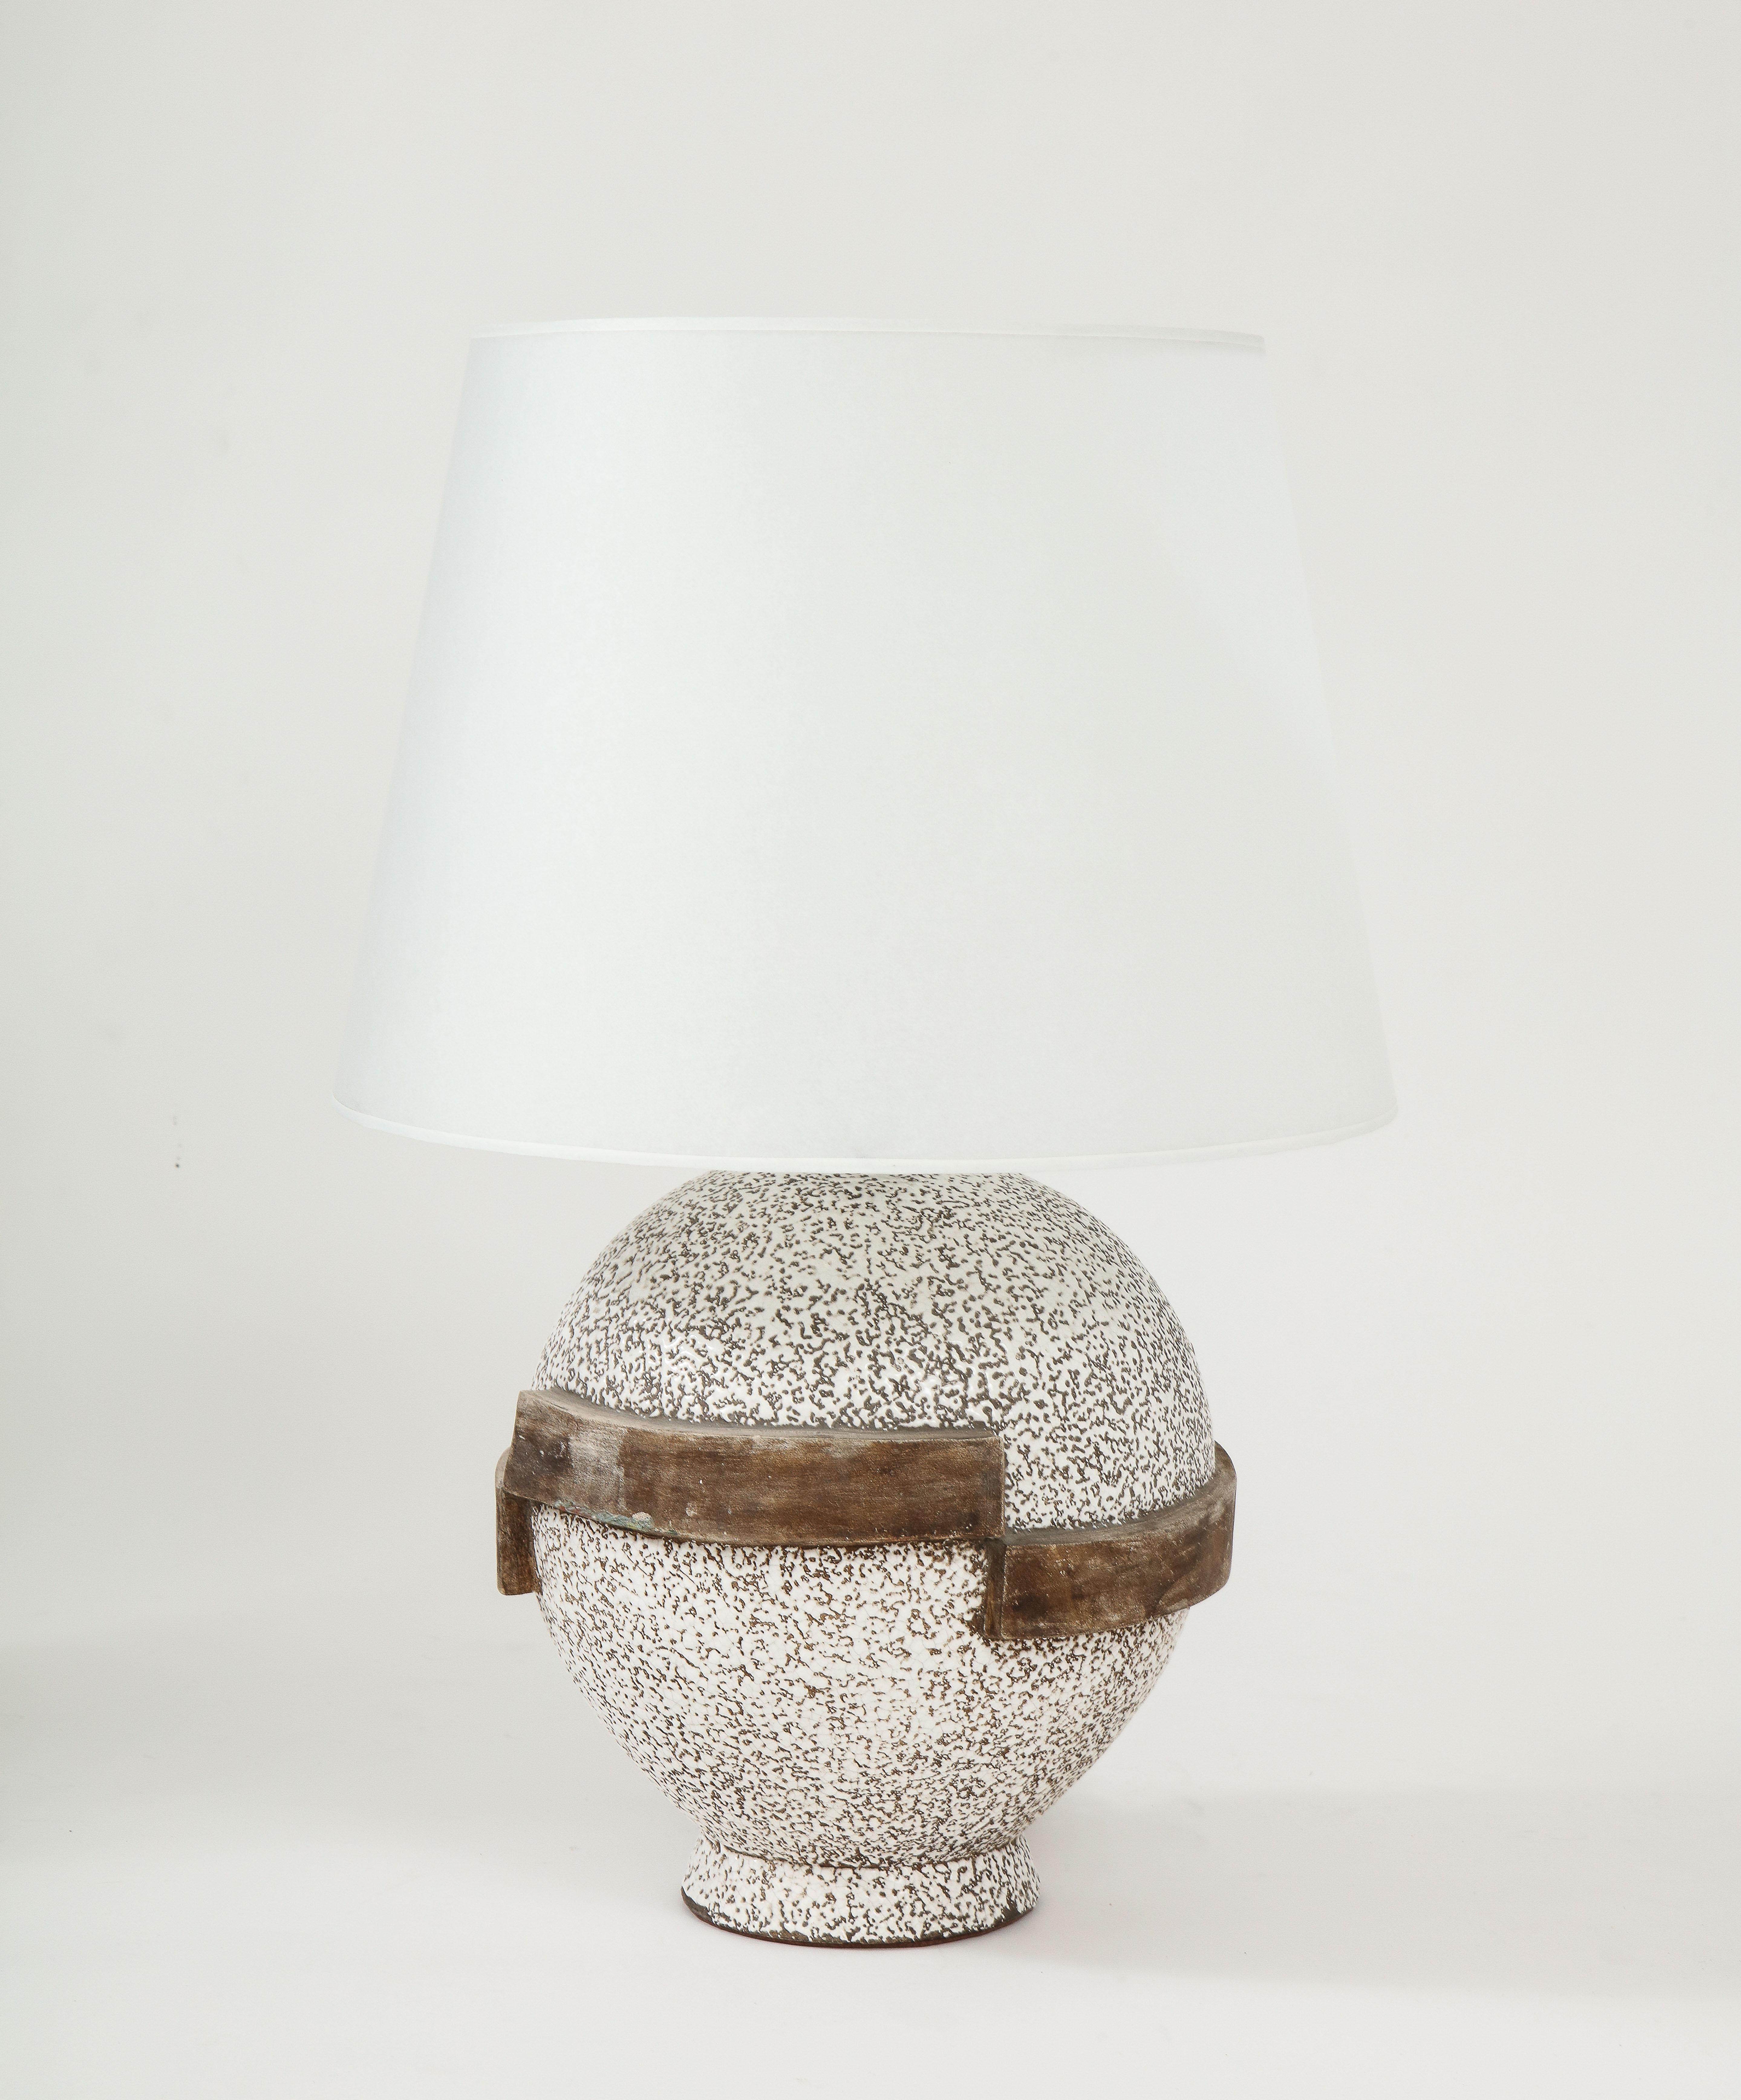 Large Mottled Ceramic Brown/white Lamp with Custom Vellum Shade, France, c. 1935-40
H: 22 H Vessel: 10.75 Diam. at widest: 10.5, Bottom of  shade: 14.5 